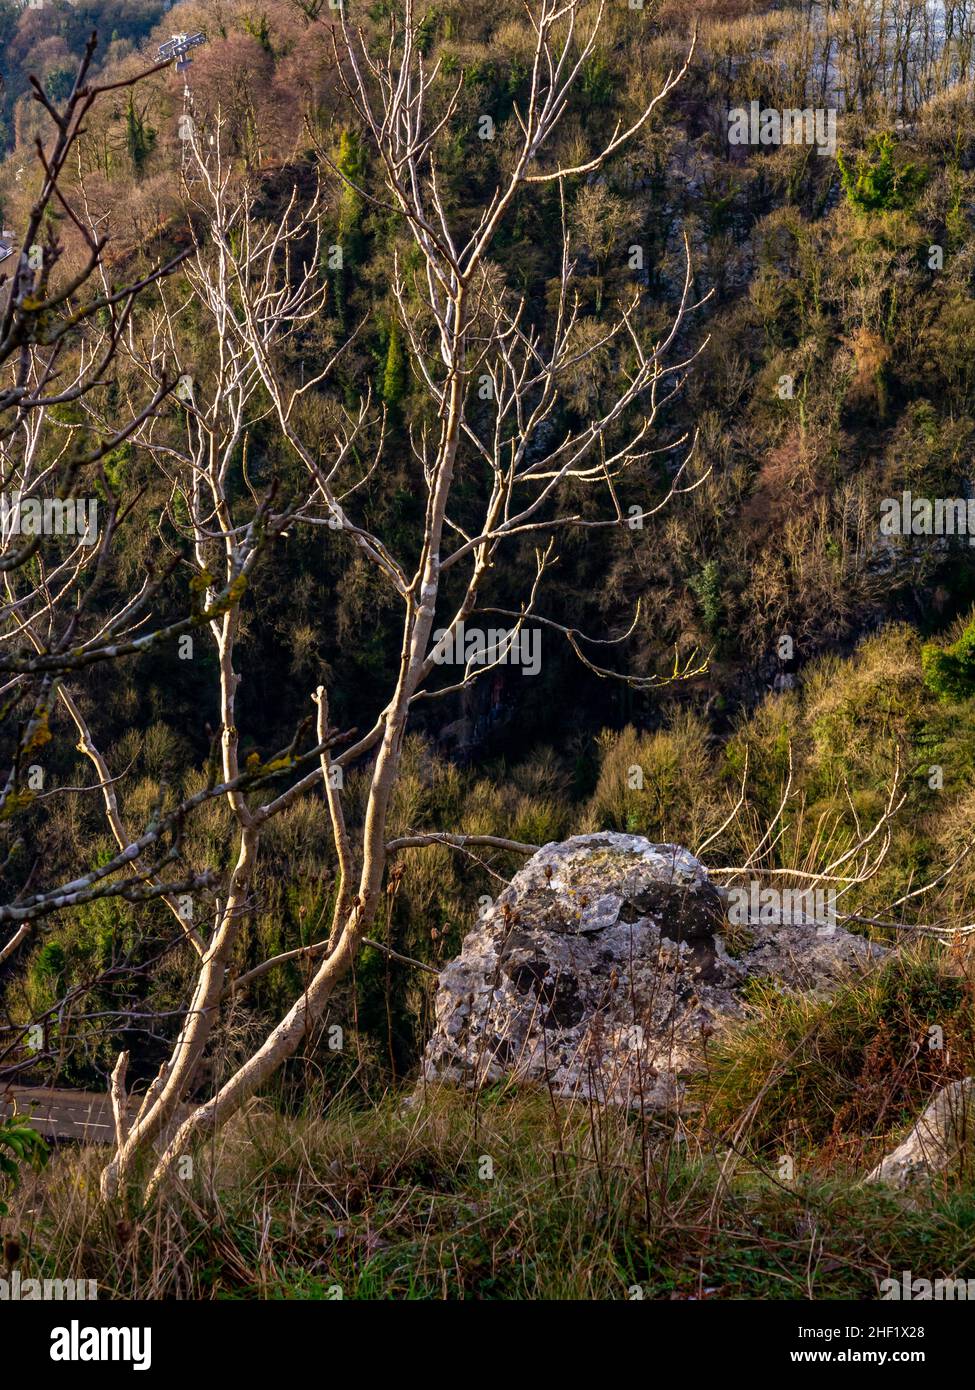 The limestone cliffs with trees in winter colour at the summit of High Tor in Matlock Bath in the Derbyshire Peak District England UK Stock Photo